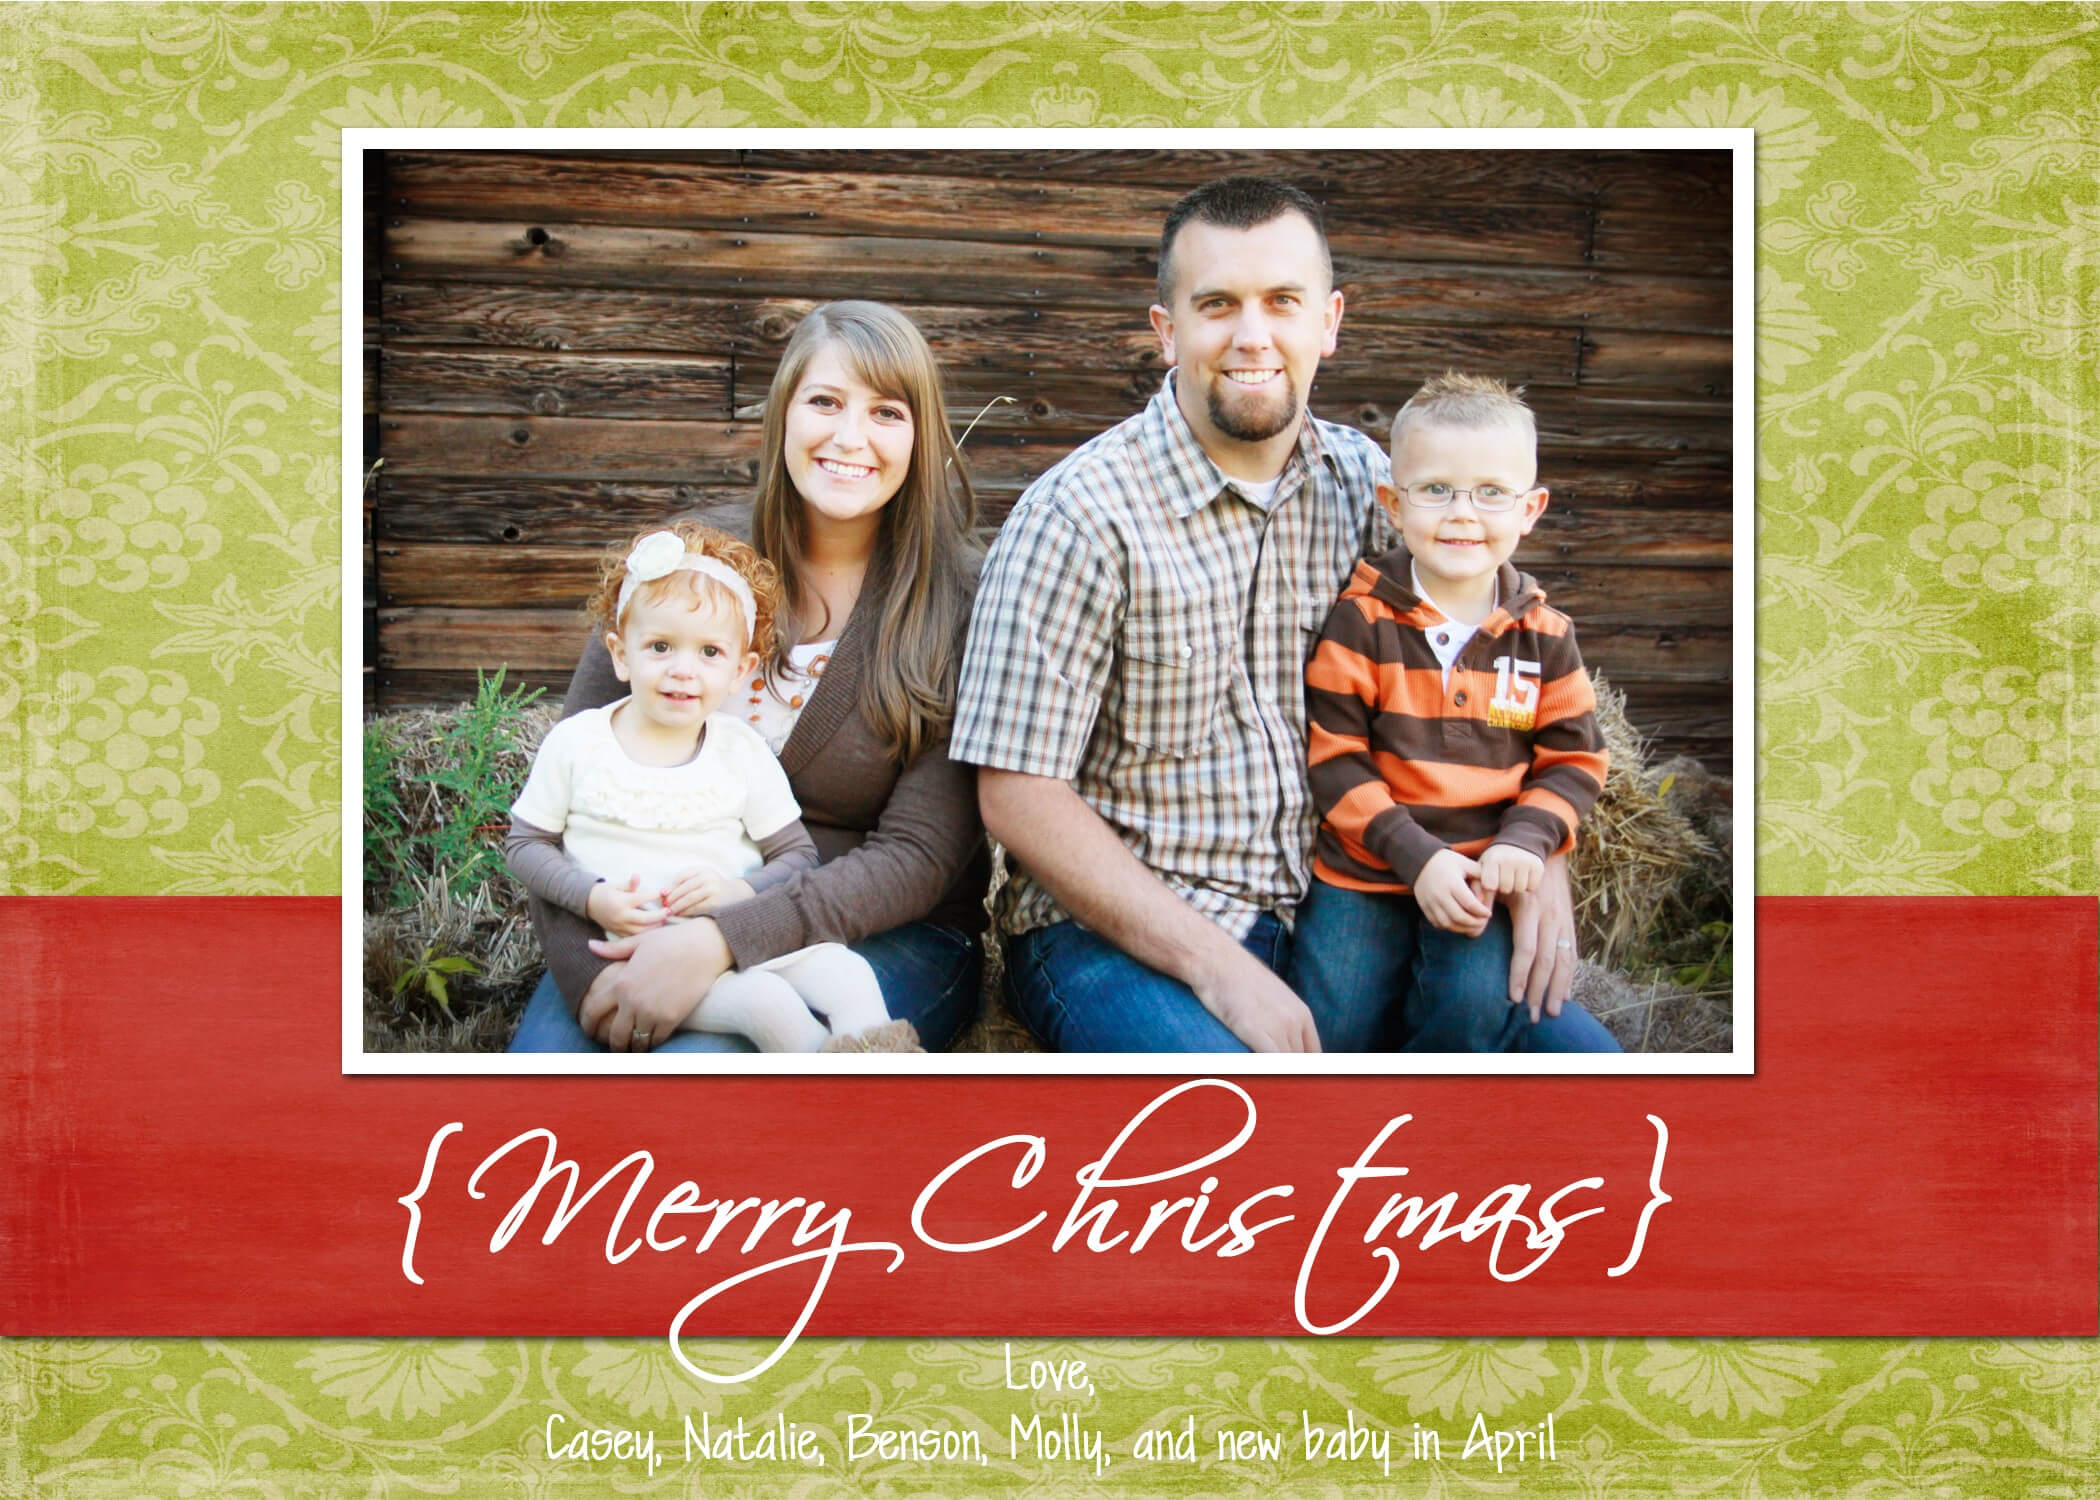 Christmas Card Templates Photoshop Free Download Penaime With Free Photoshop Christmas Card Templates For Photographers